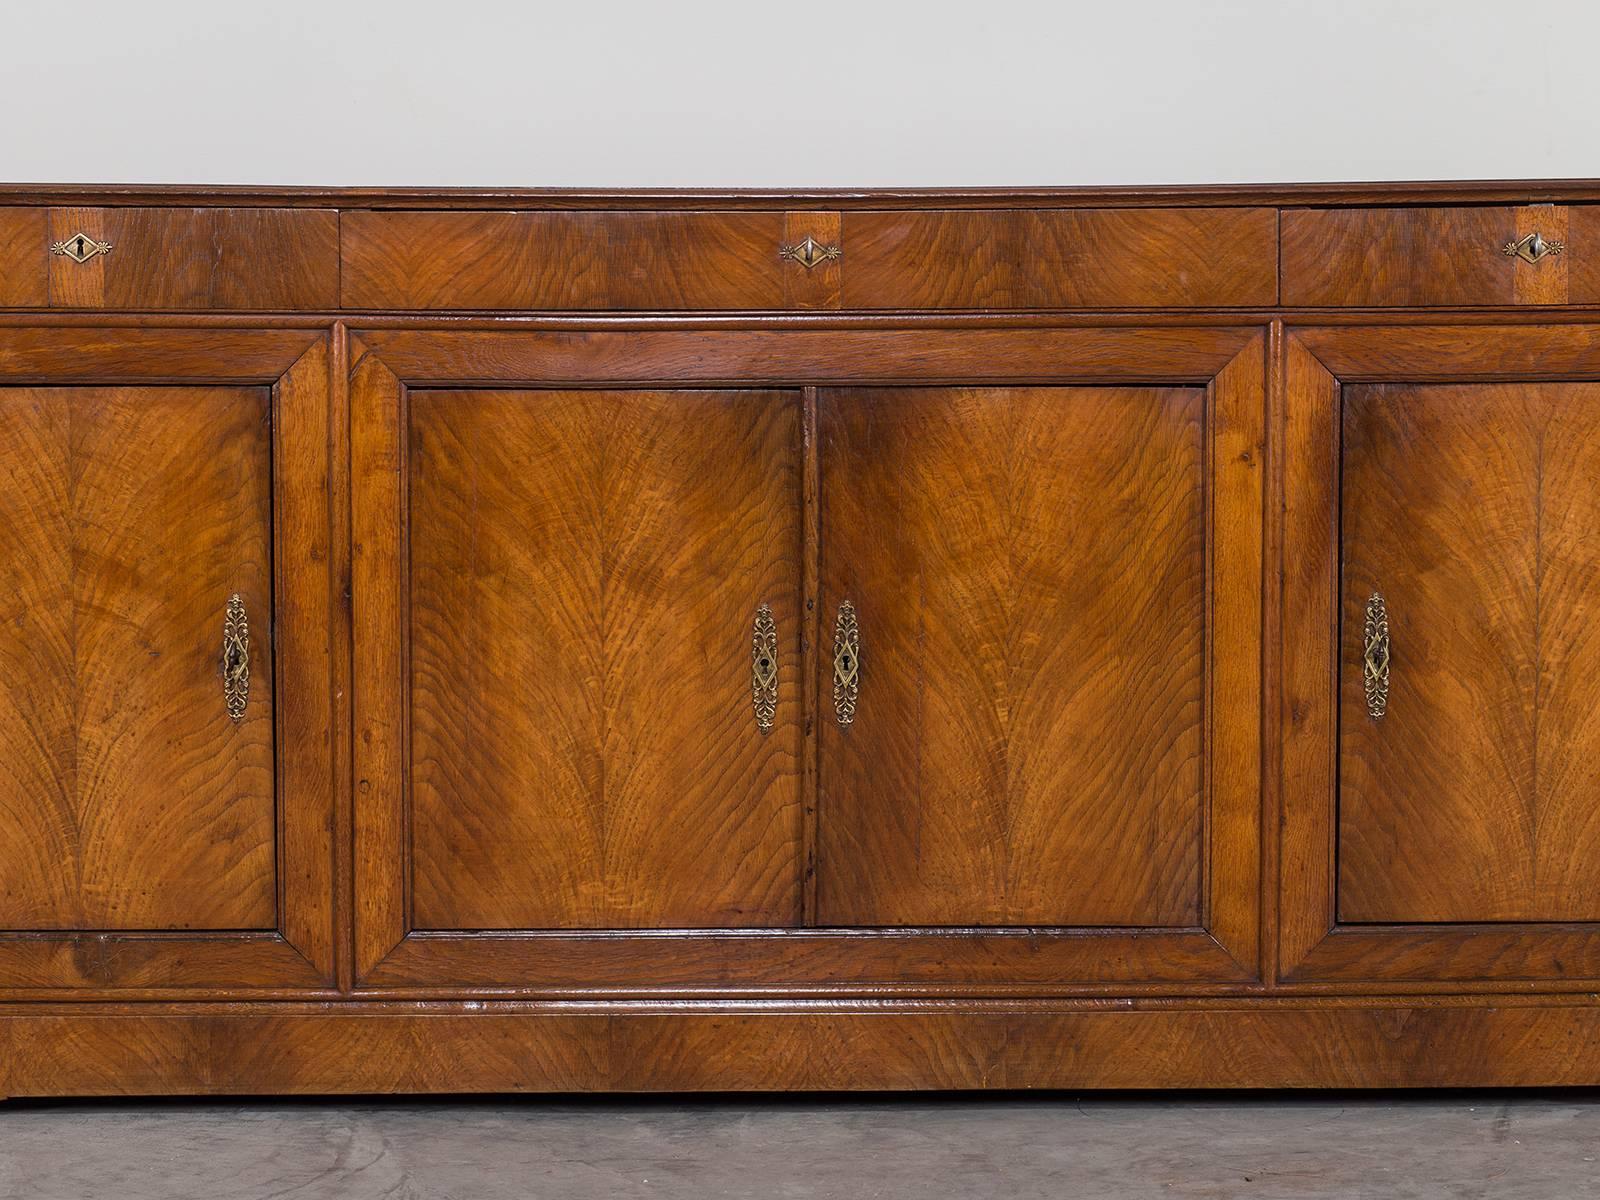 Receive our new selections direct from 1stdibs by email each week. Please click Follow Dealer below and see them first!

This exceptional antique French buffet enfilade circa 1840 showcases superb cabinet making. The beauty of the bookmatched elm